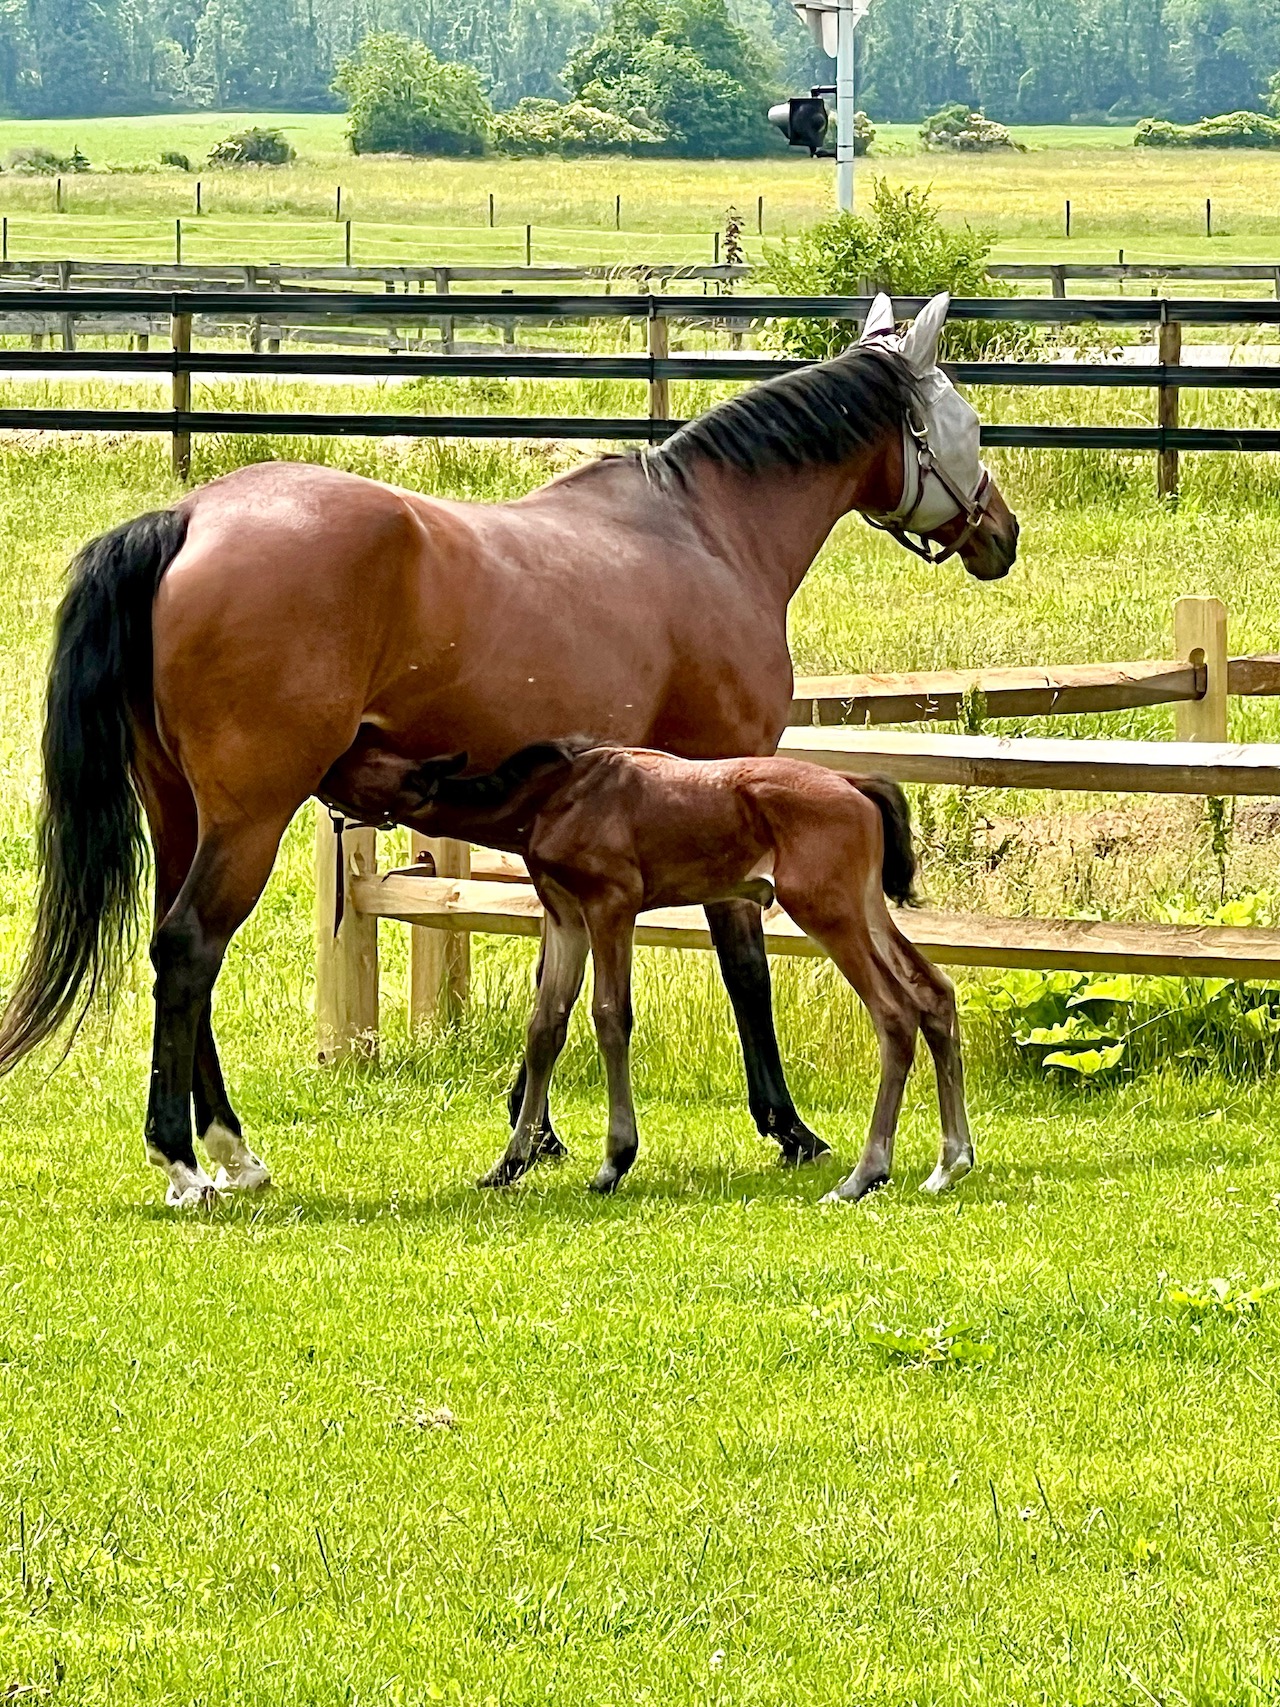 A mare and foal in a green pasture by a fence